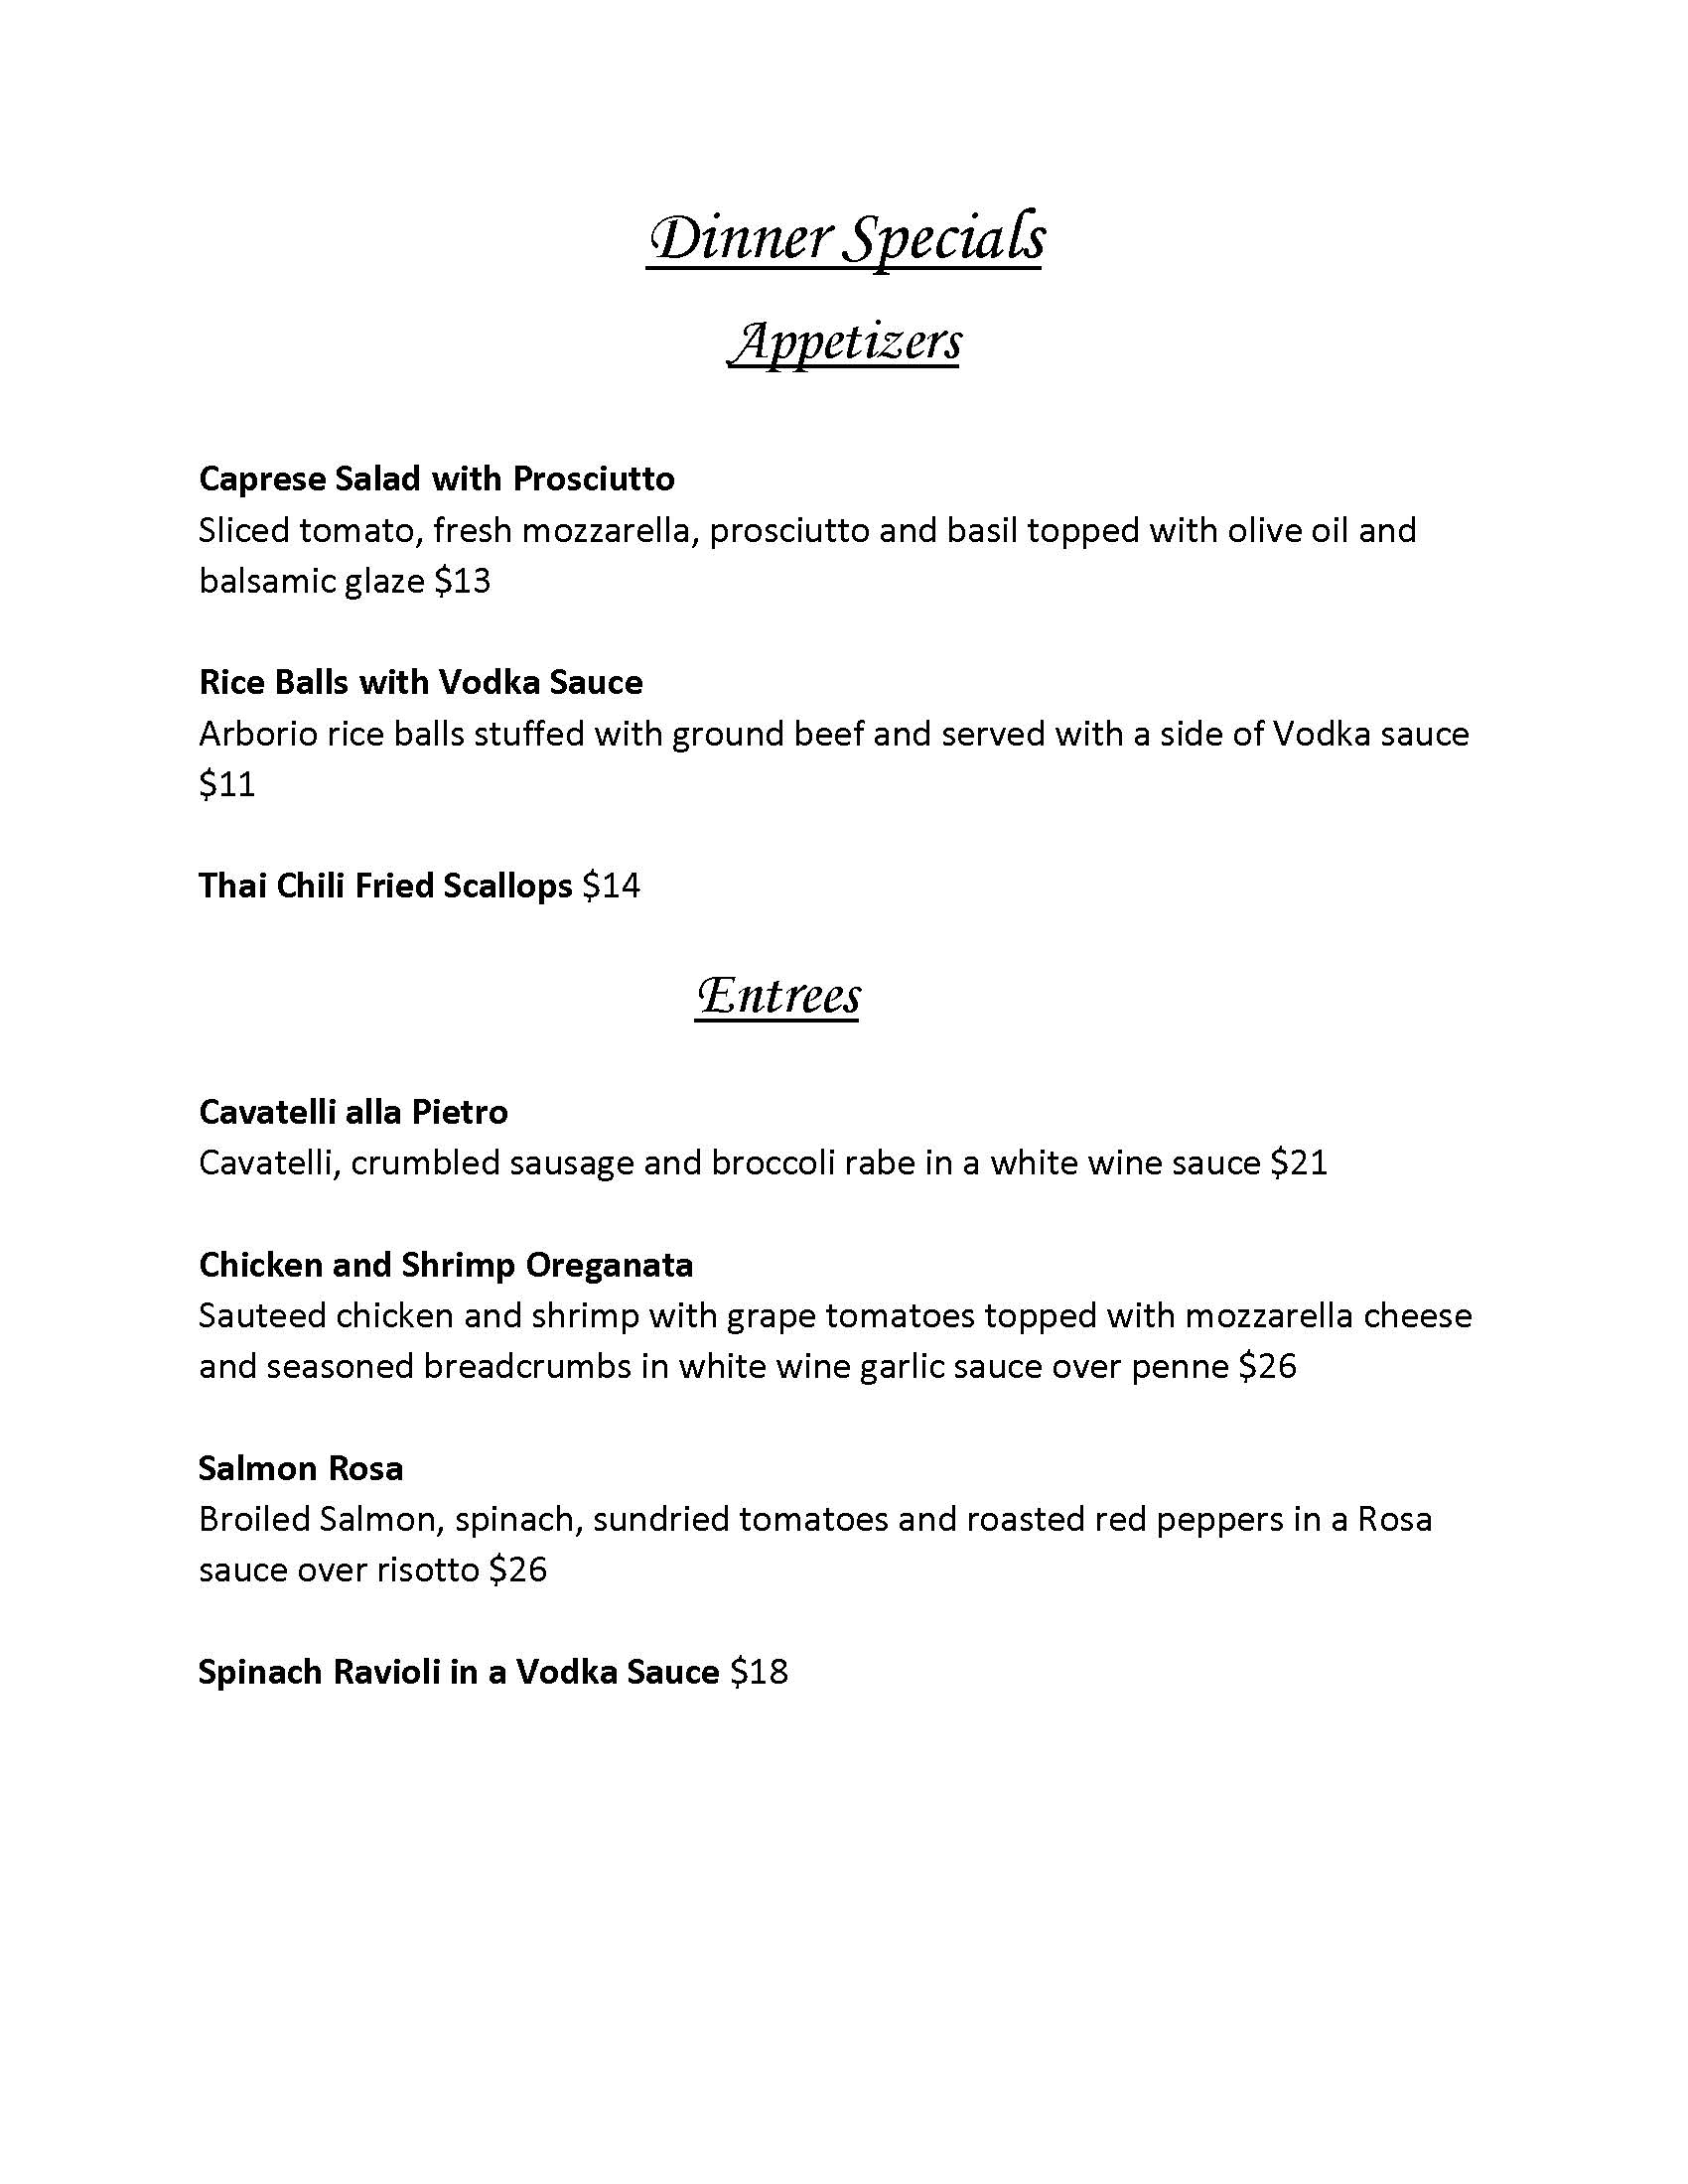 Dinner Specials menu featuring various appetizers and entrées. Appetizers: Caprese Salad, Rice Balls with Vodka Sauce, Thai Chili Fried Scallops. Entrées: Cavatelli alla Pietro, Chicken and Shrimp Oreganata, Salmon Rosa, Spinach Ravioli in a Vodka Sauce.